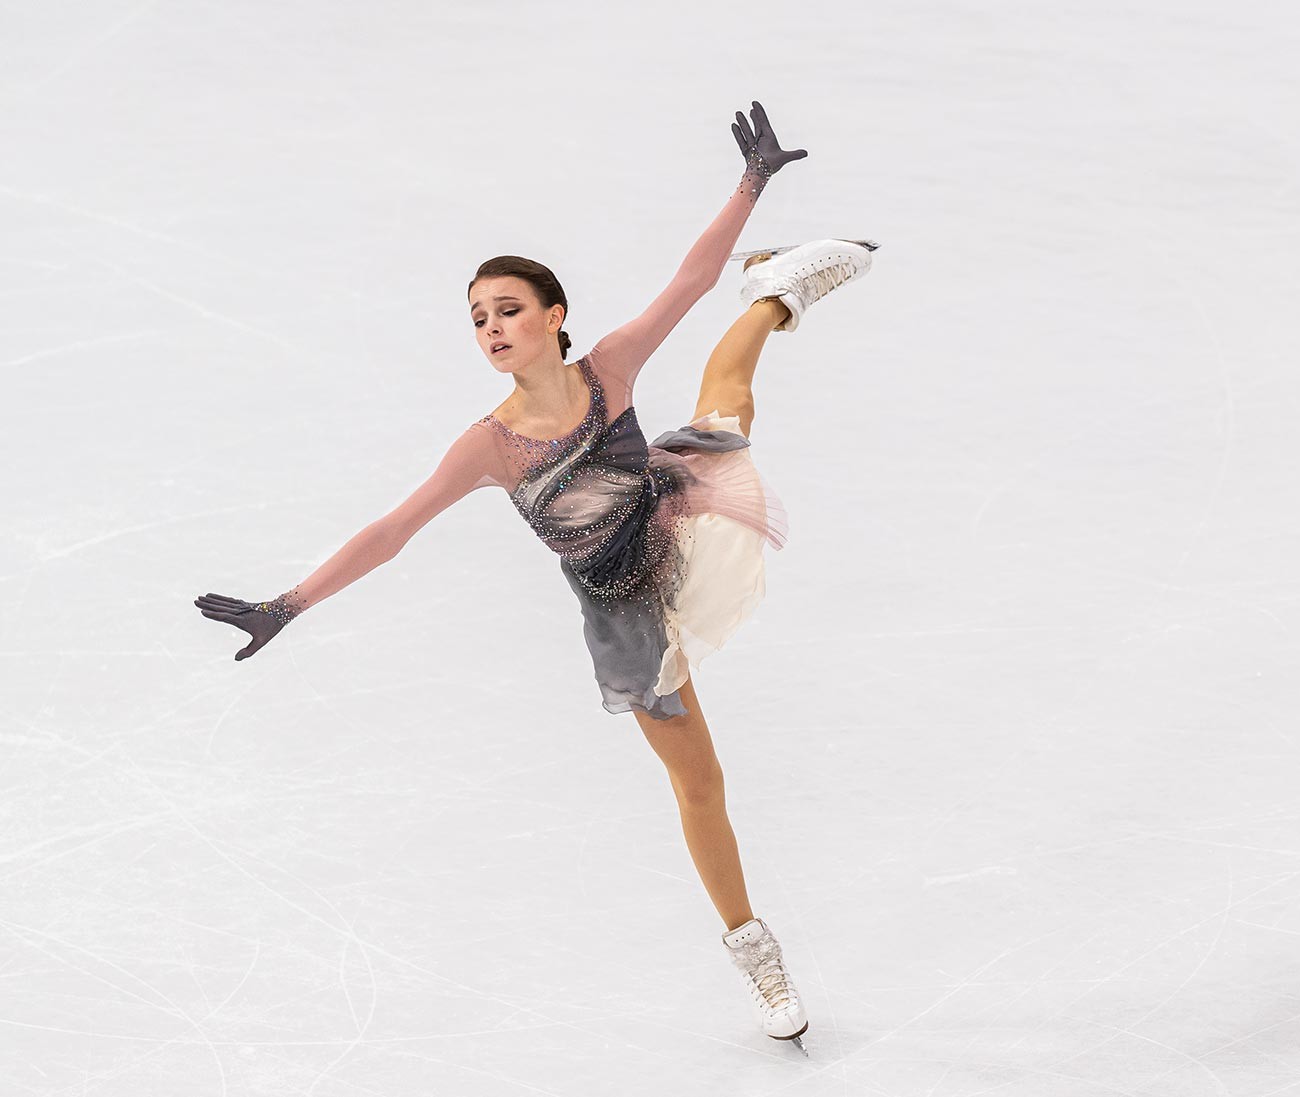 Anna Shcherbakova of Russia competes in Women's Free Skating during the ISU World Figure Skating Championships on March 26, 2021 in Stockholm 